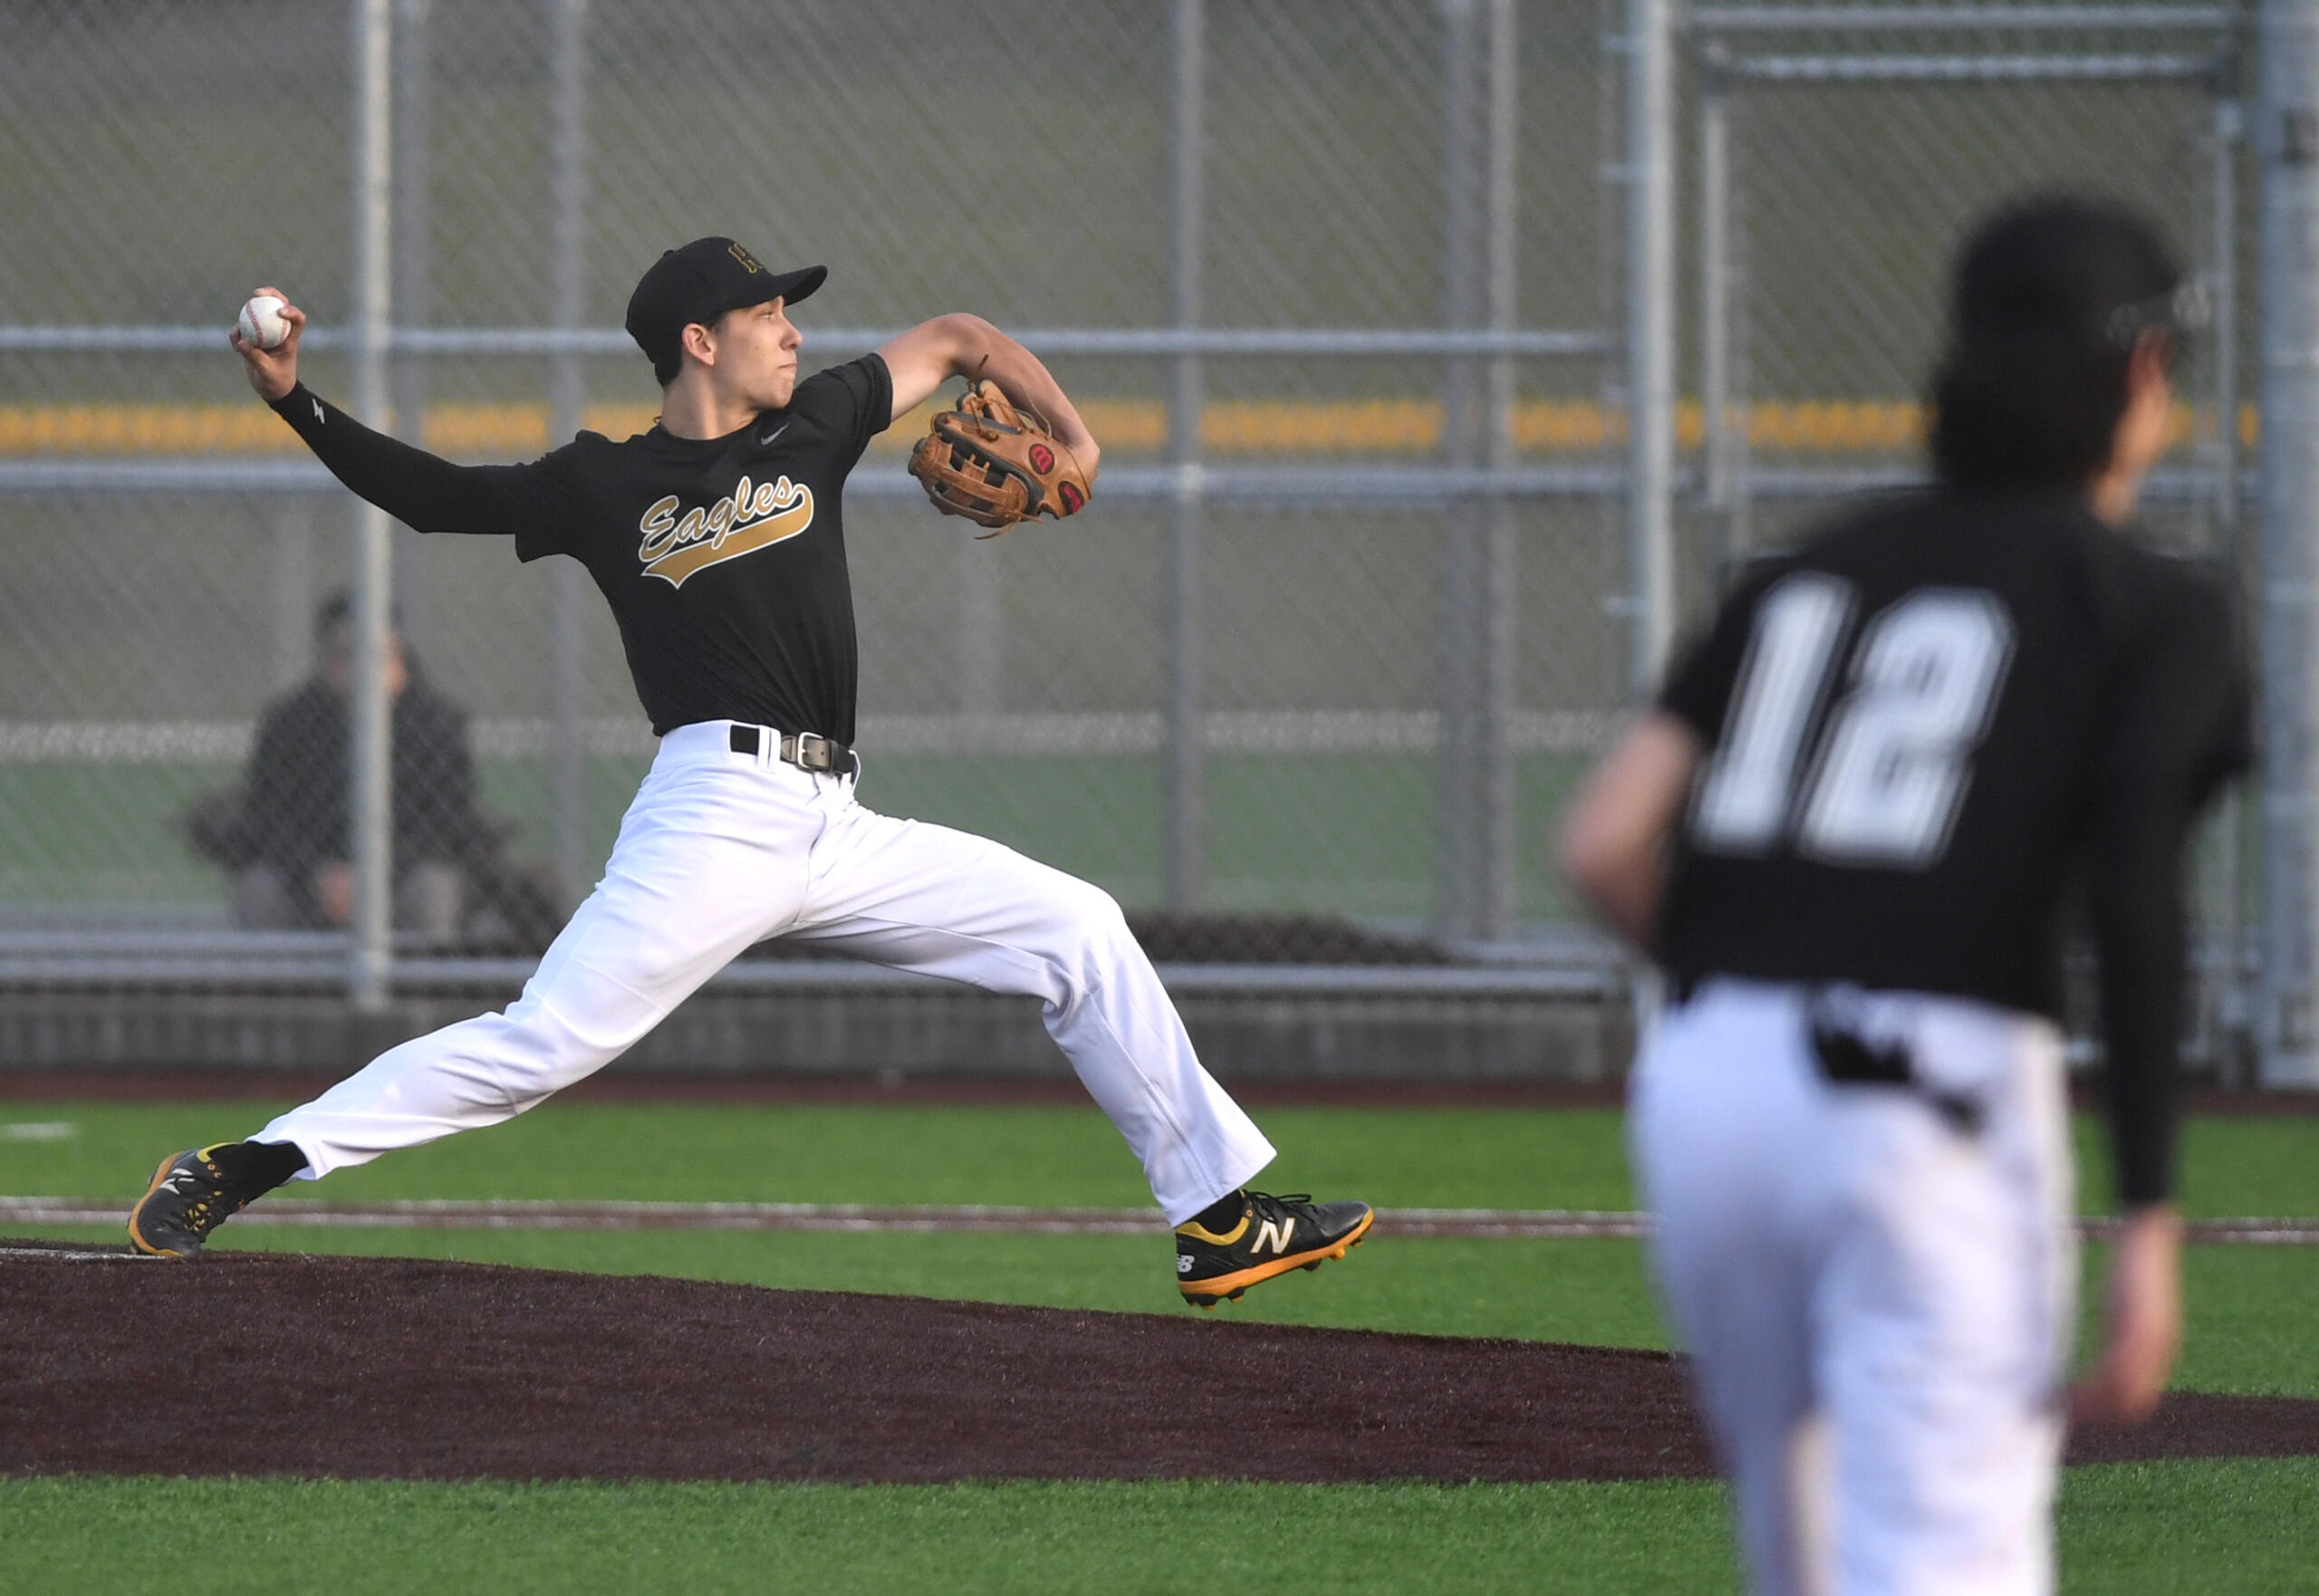 Hudson’s Bay pitcher Chanz Flores throws the ball Friday, March 11, 2022, during the Eagles’ 5-3 win against Evergreen at the Evergreen Sports Complex.